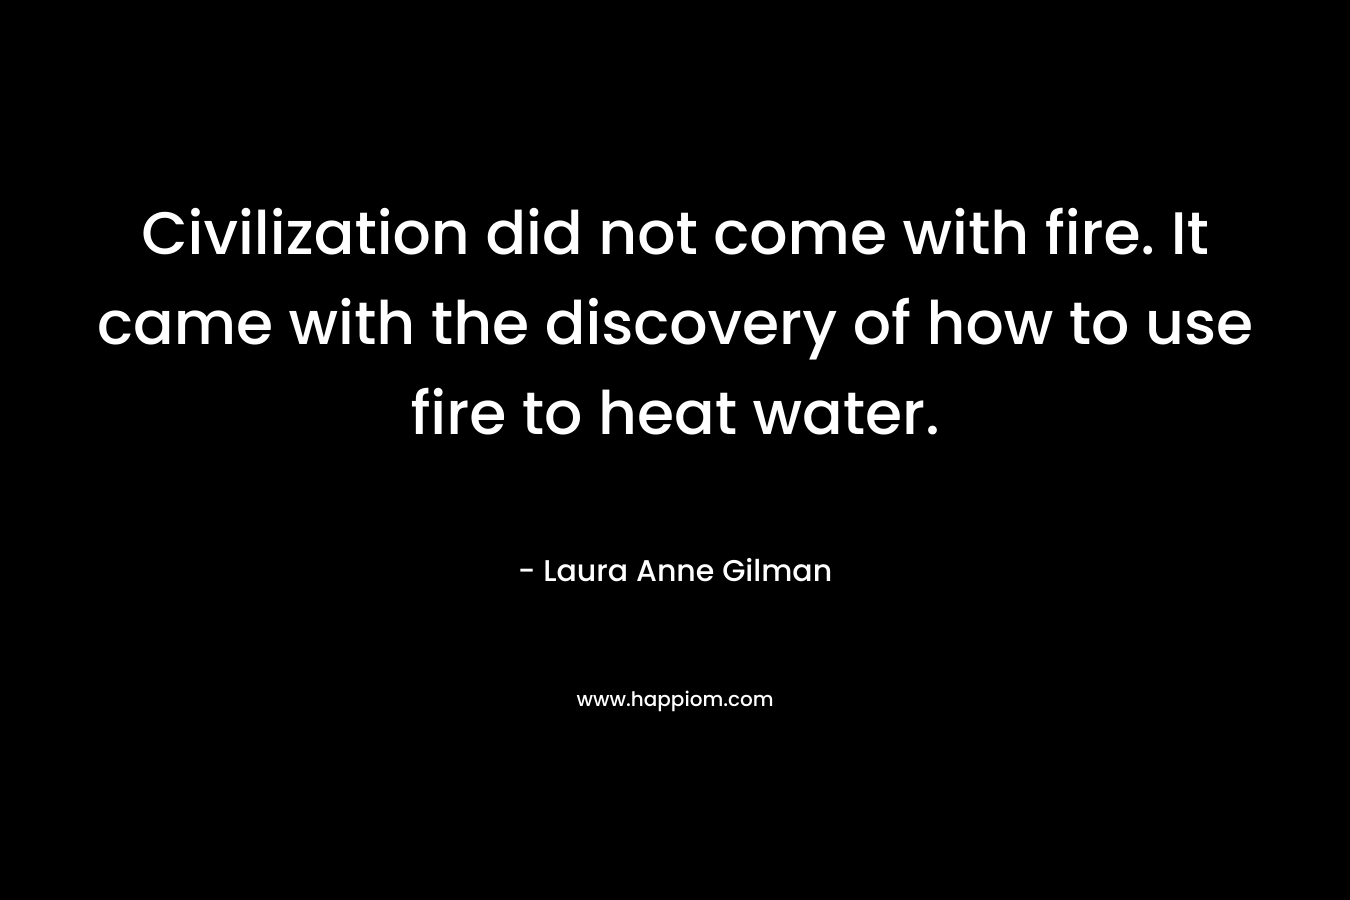 Civilization did not come with fire. It came with the discovery of how to use fire to heat water. – Laura Anne Gilman